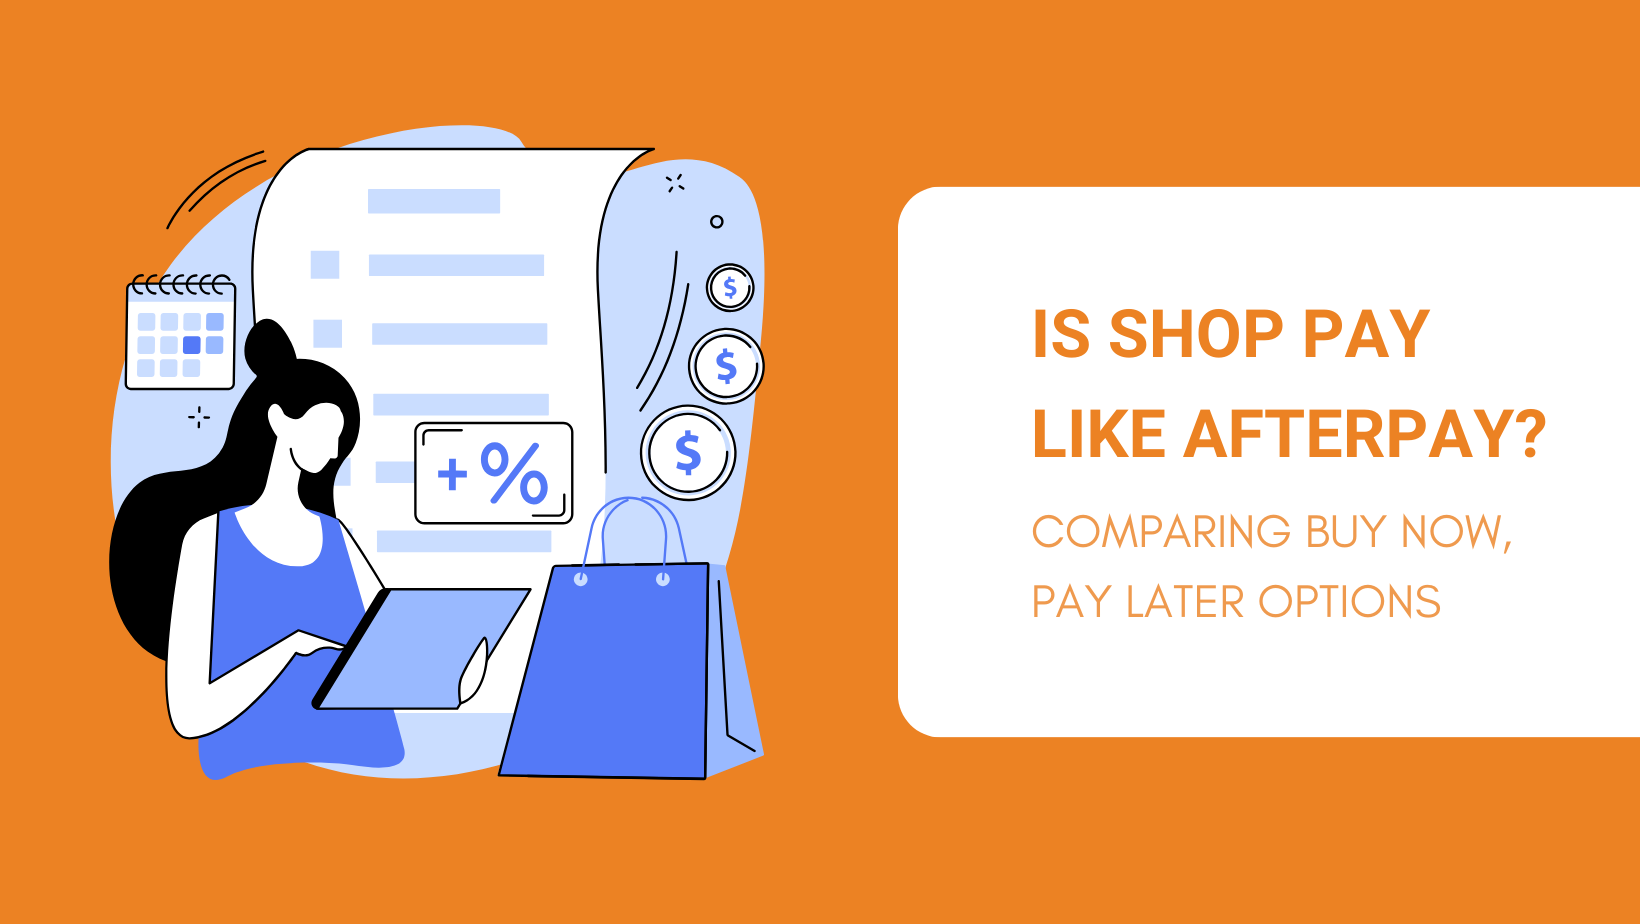 IS SHOP PAY LIKE AFTERPAY COMPARING BUY NOW, PAY LATER OPTIONS